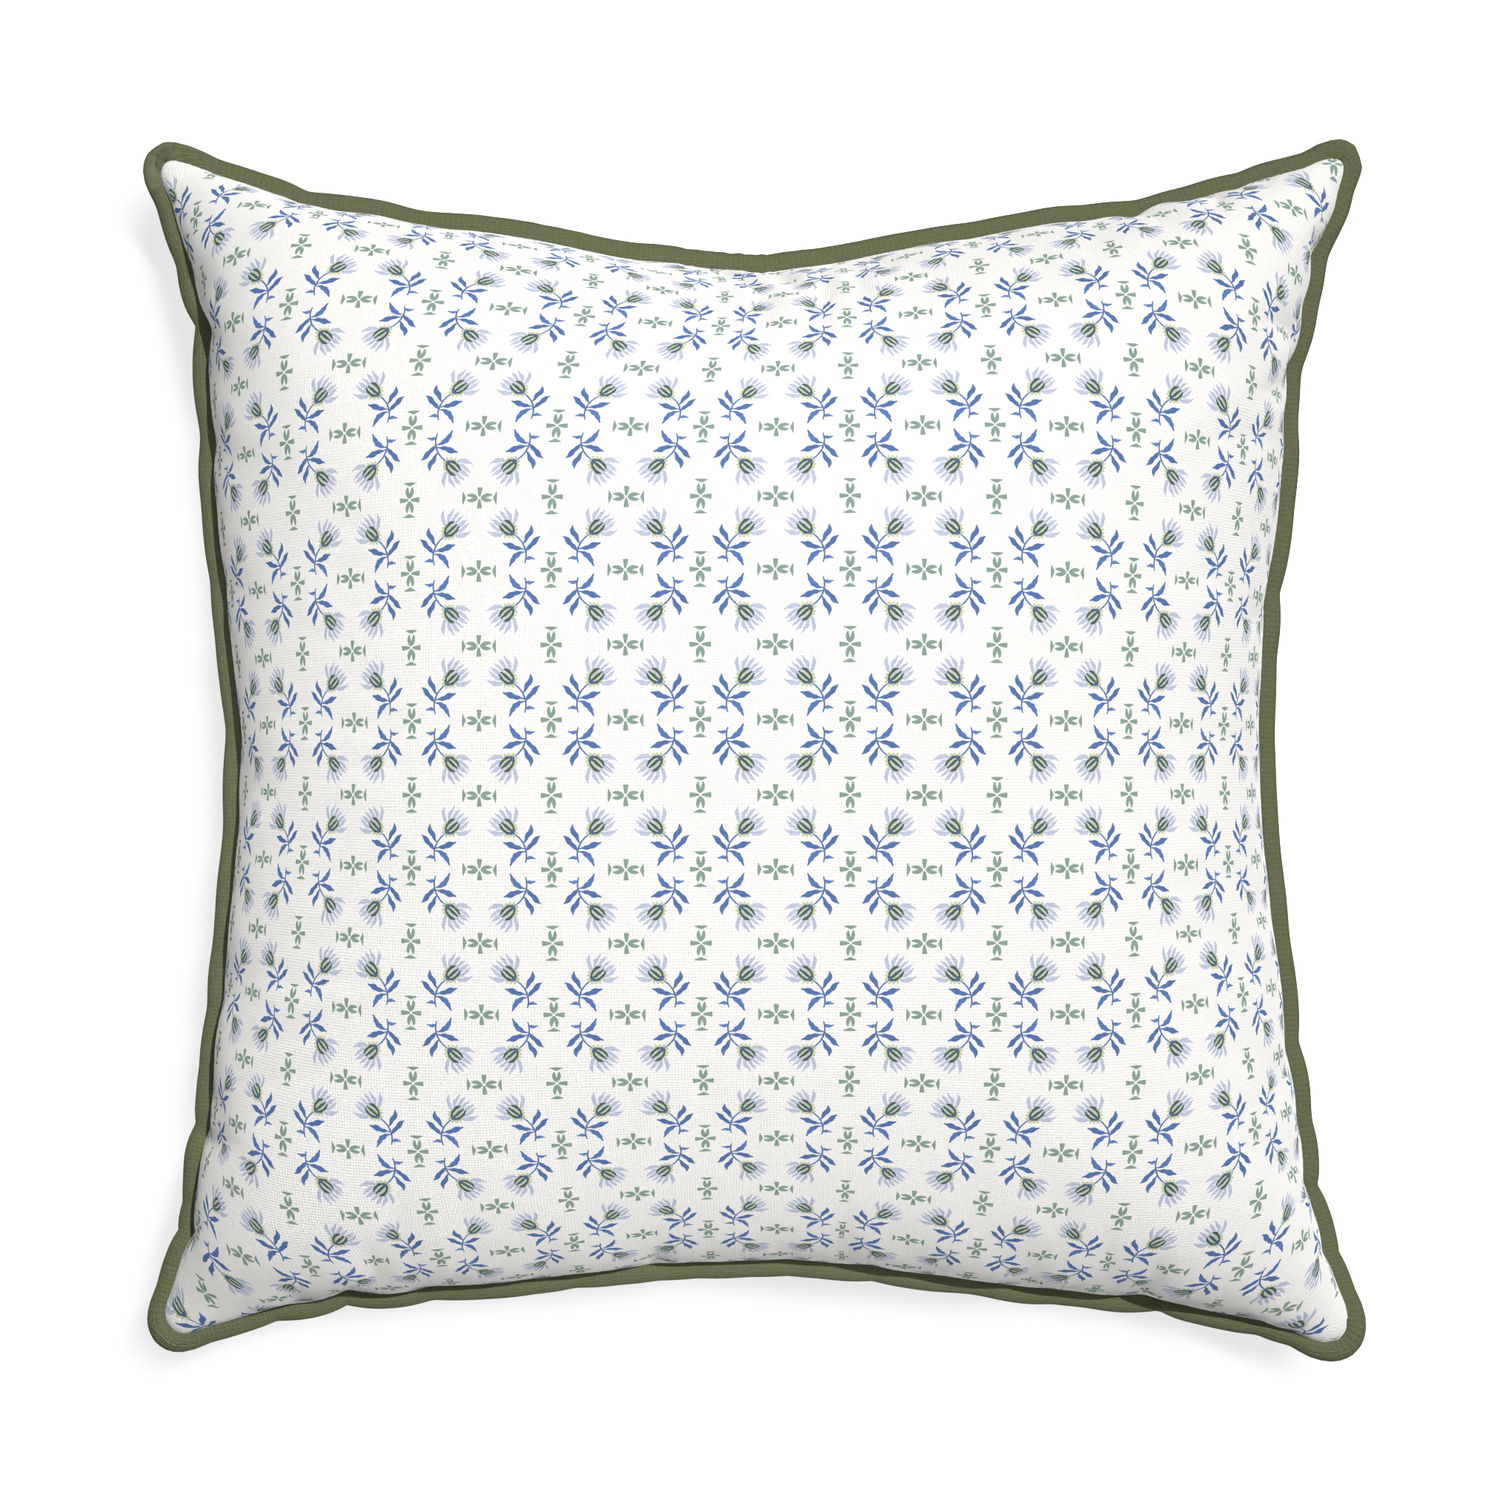 Euro-sham lee custom blue & green floralpillow with f piping on white background